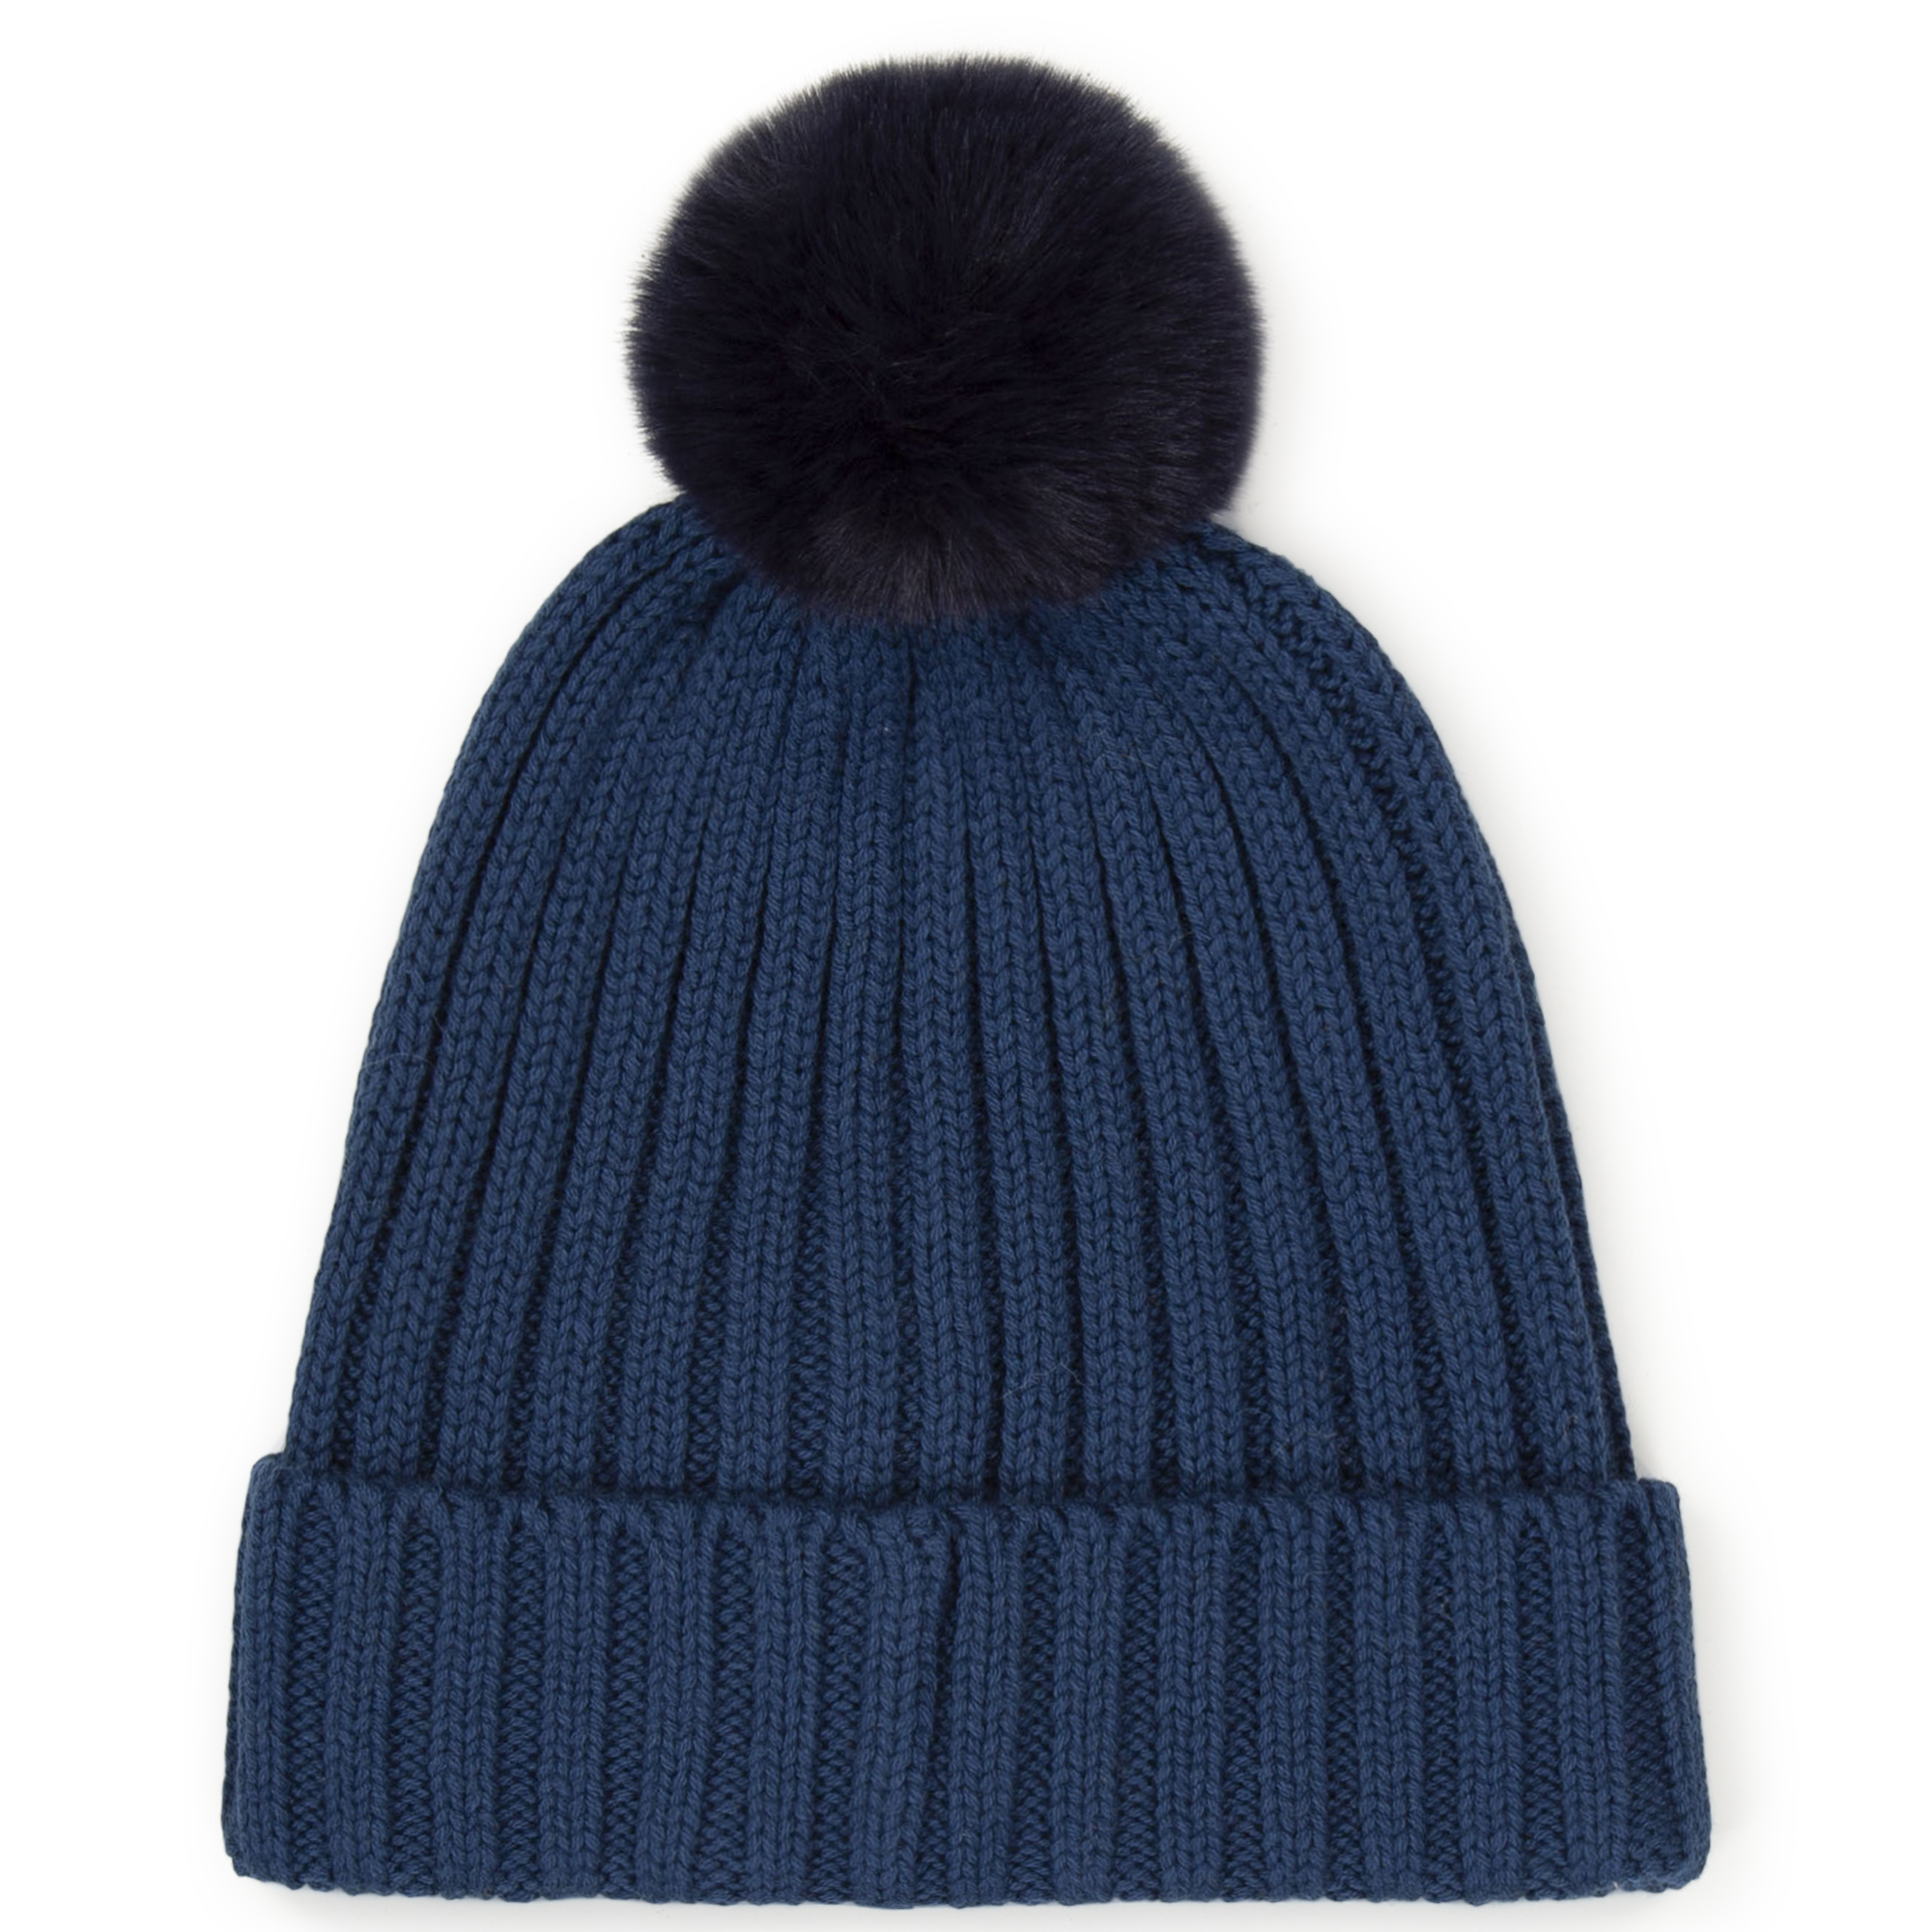 Cotton and wool hat MICHAEL KORS for GIRL